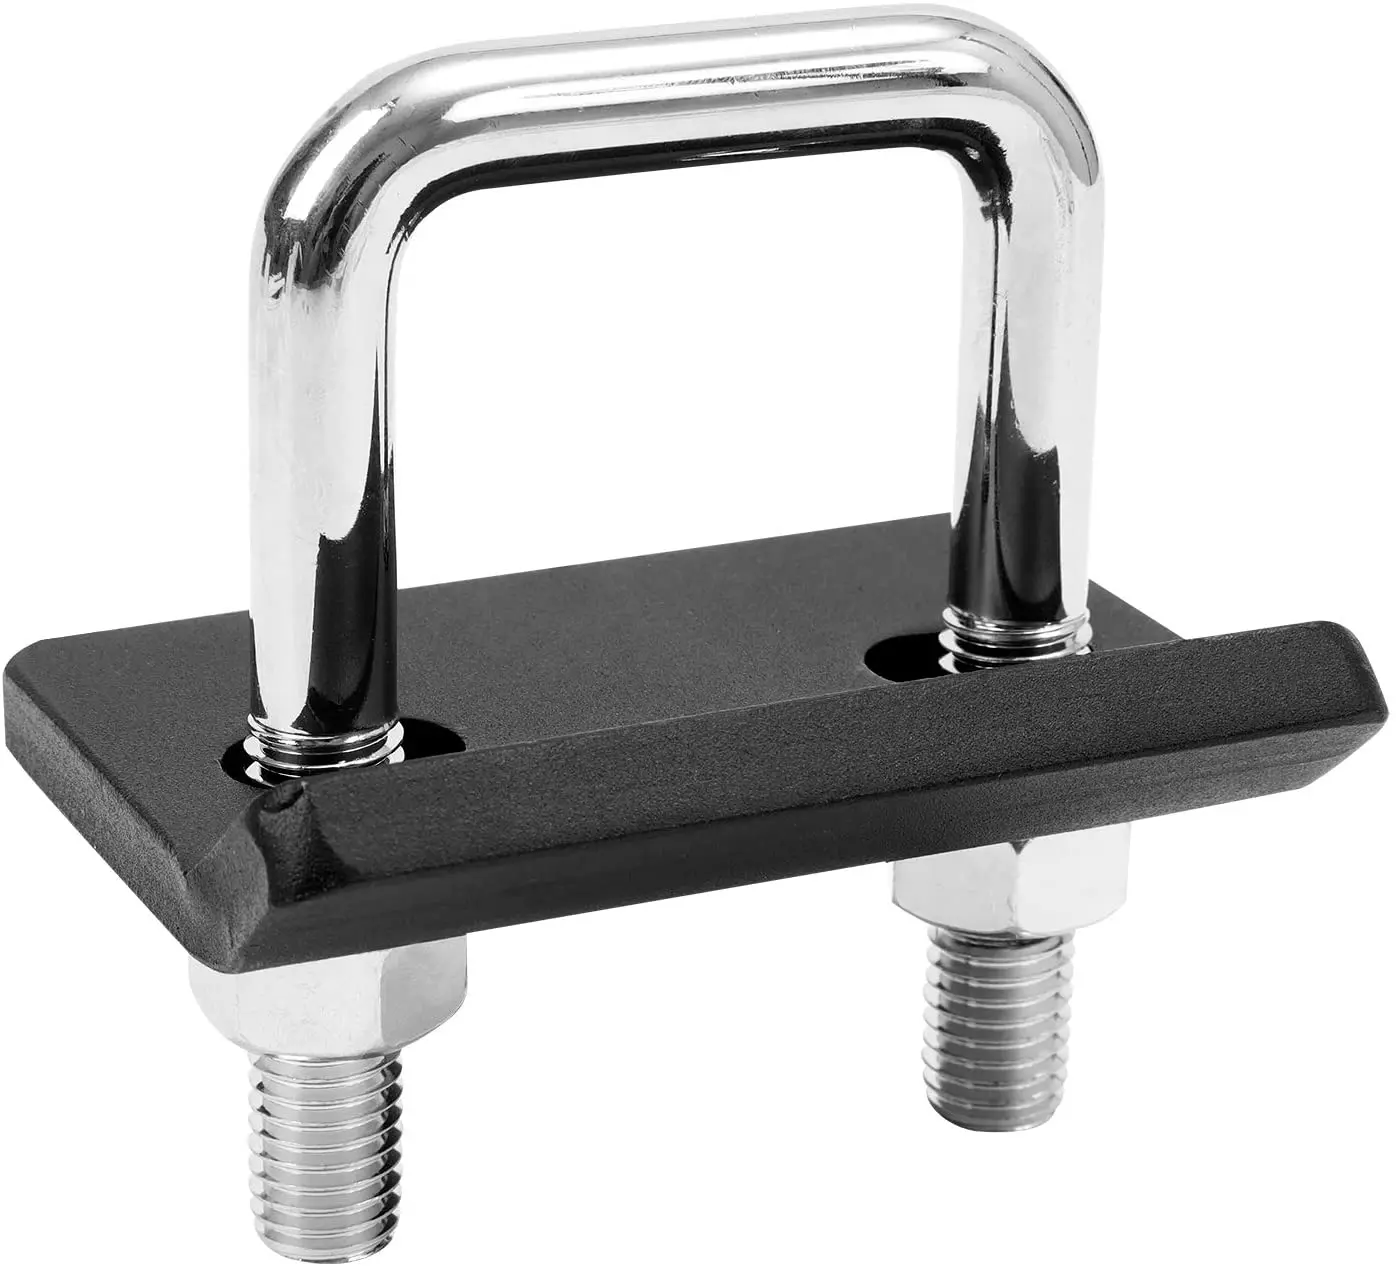 

Anti Rocking Hitch stabilizer Hitch Tightener for 2" Hitches Trailer Carriers and Racks